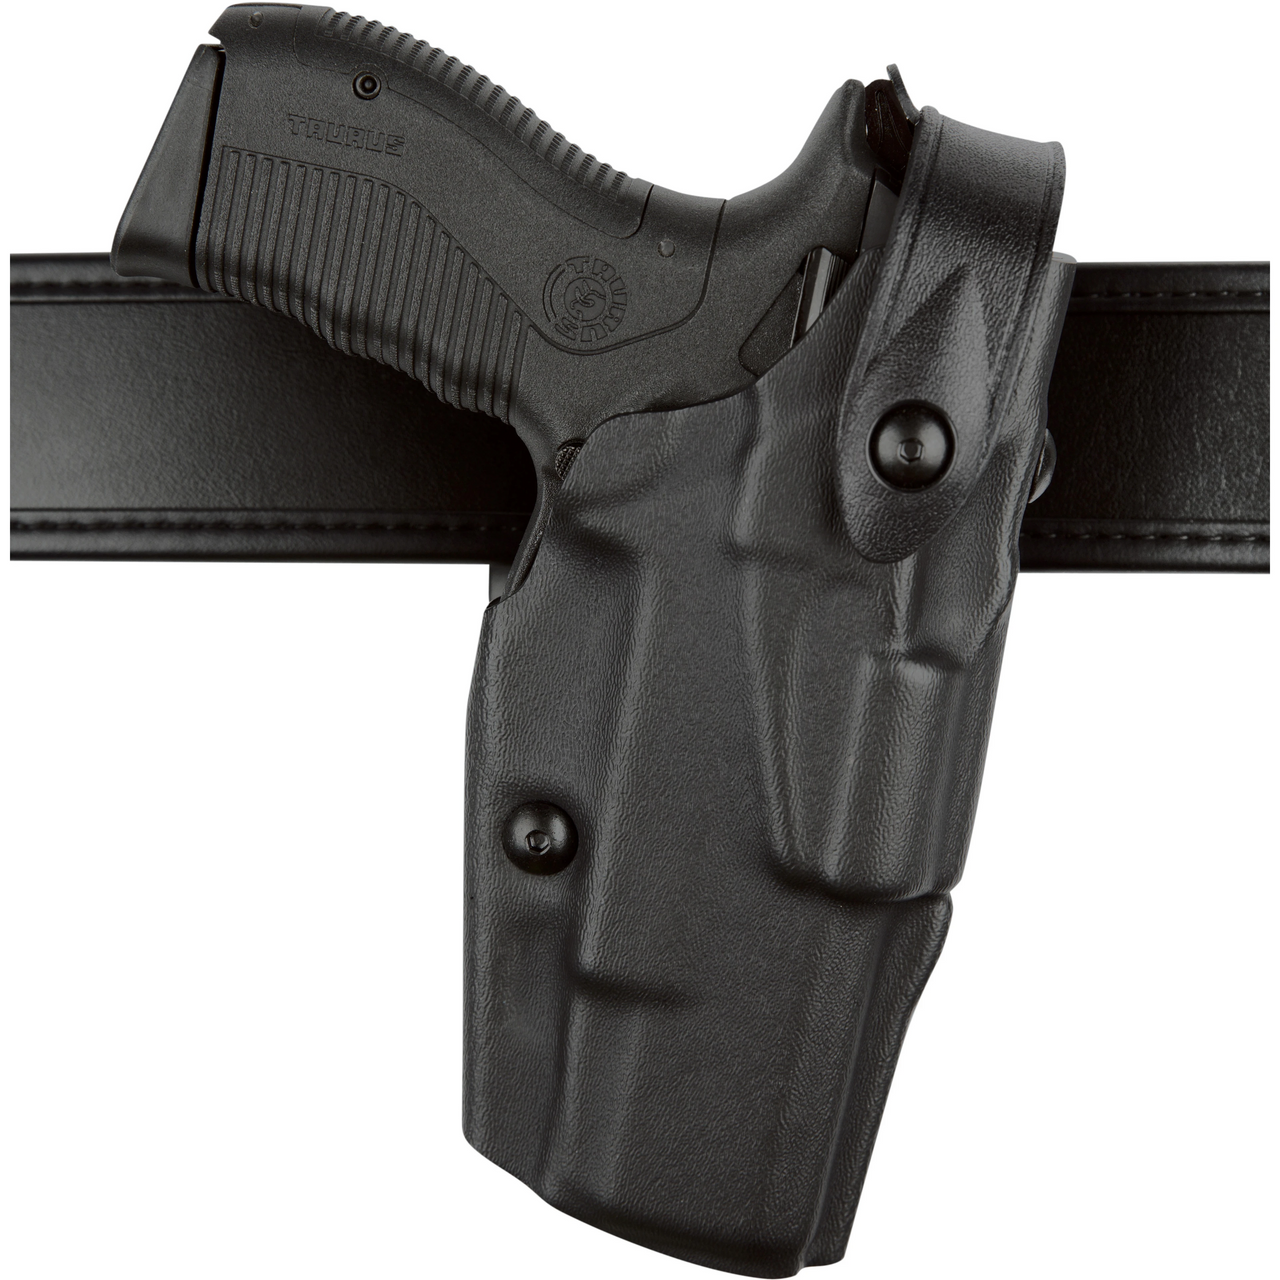 SAFARILAND 6360-832-131 GLOCK 17/22 Level 3 Duty Holster With